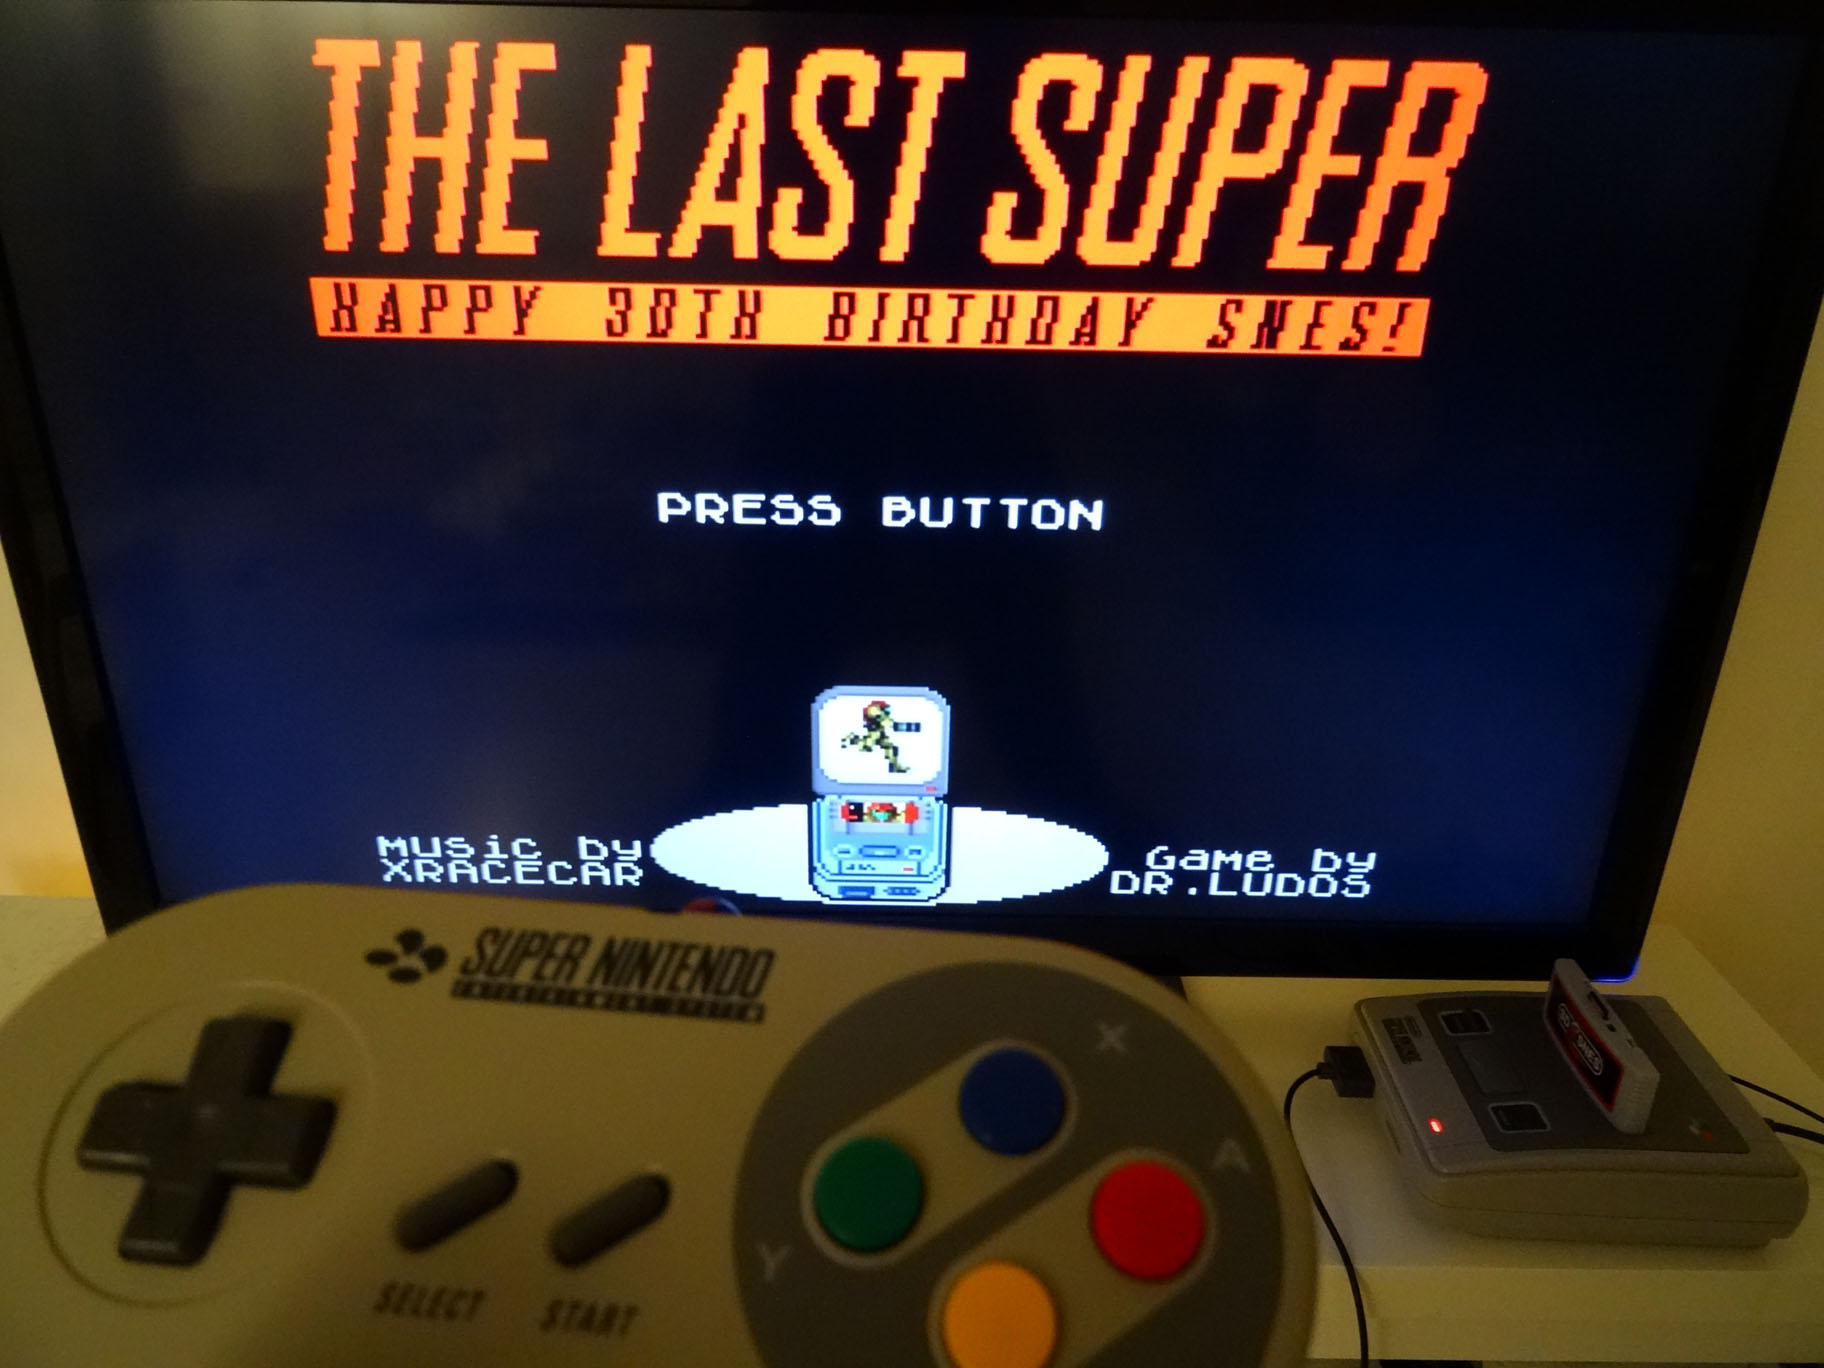 The Last by Dr. Ludos